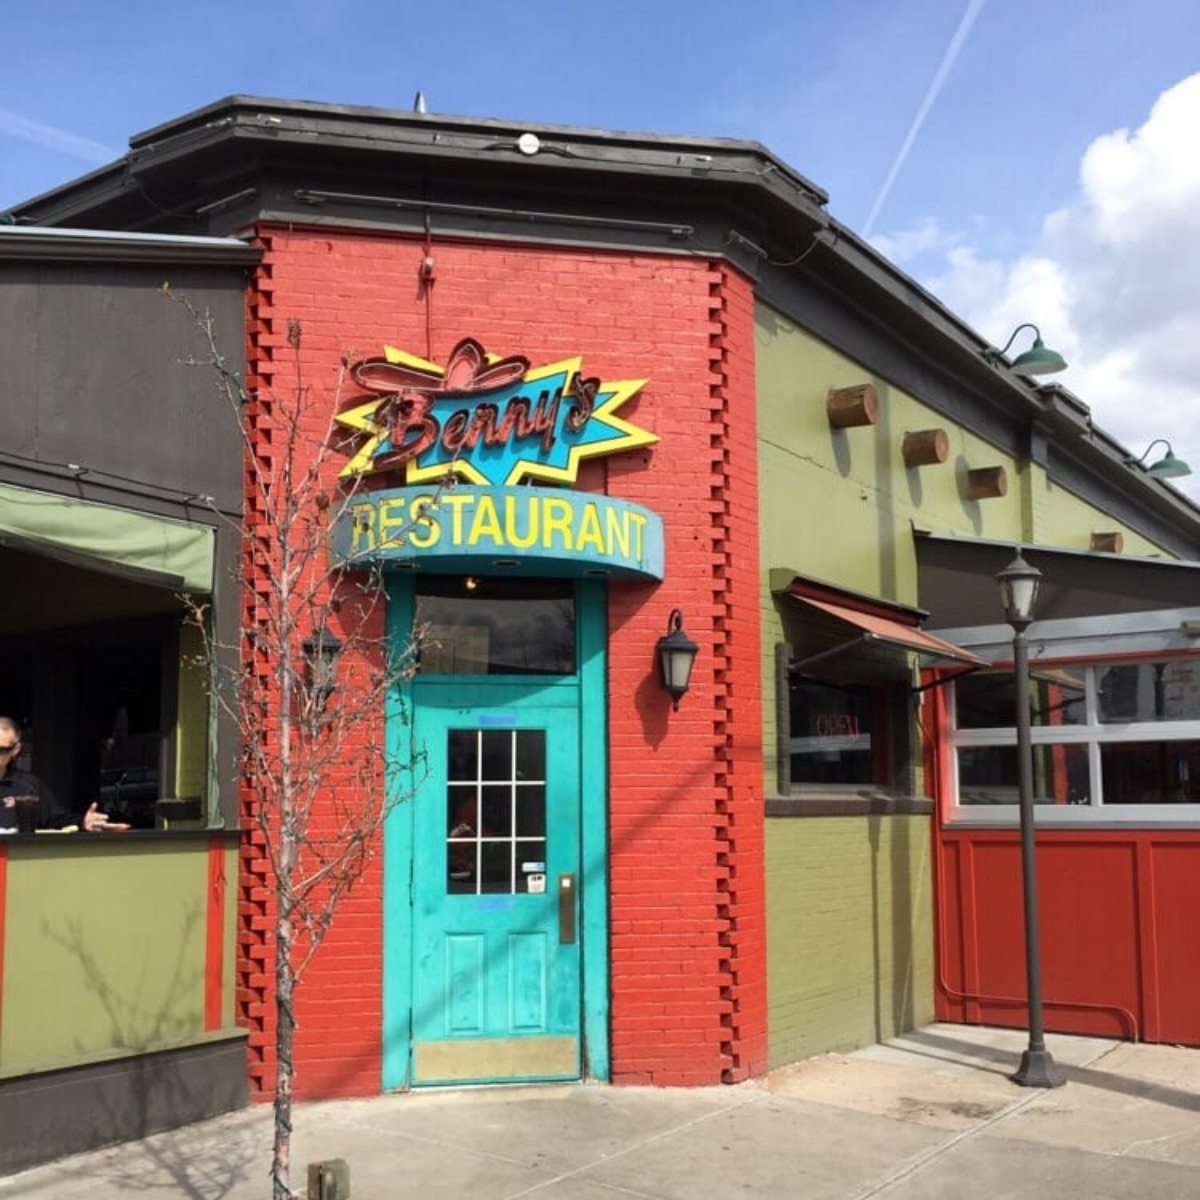 Building Plans Approved for Reopening of Benny’s Restaurant and Cantina